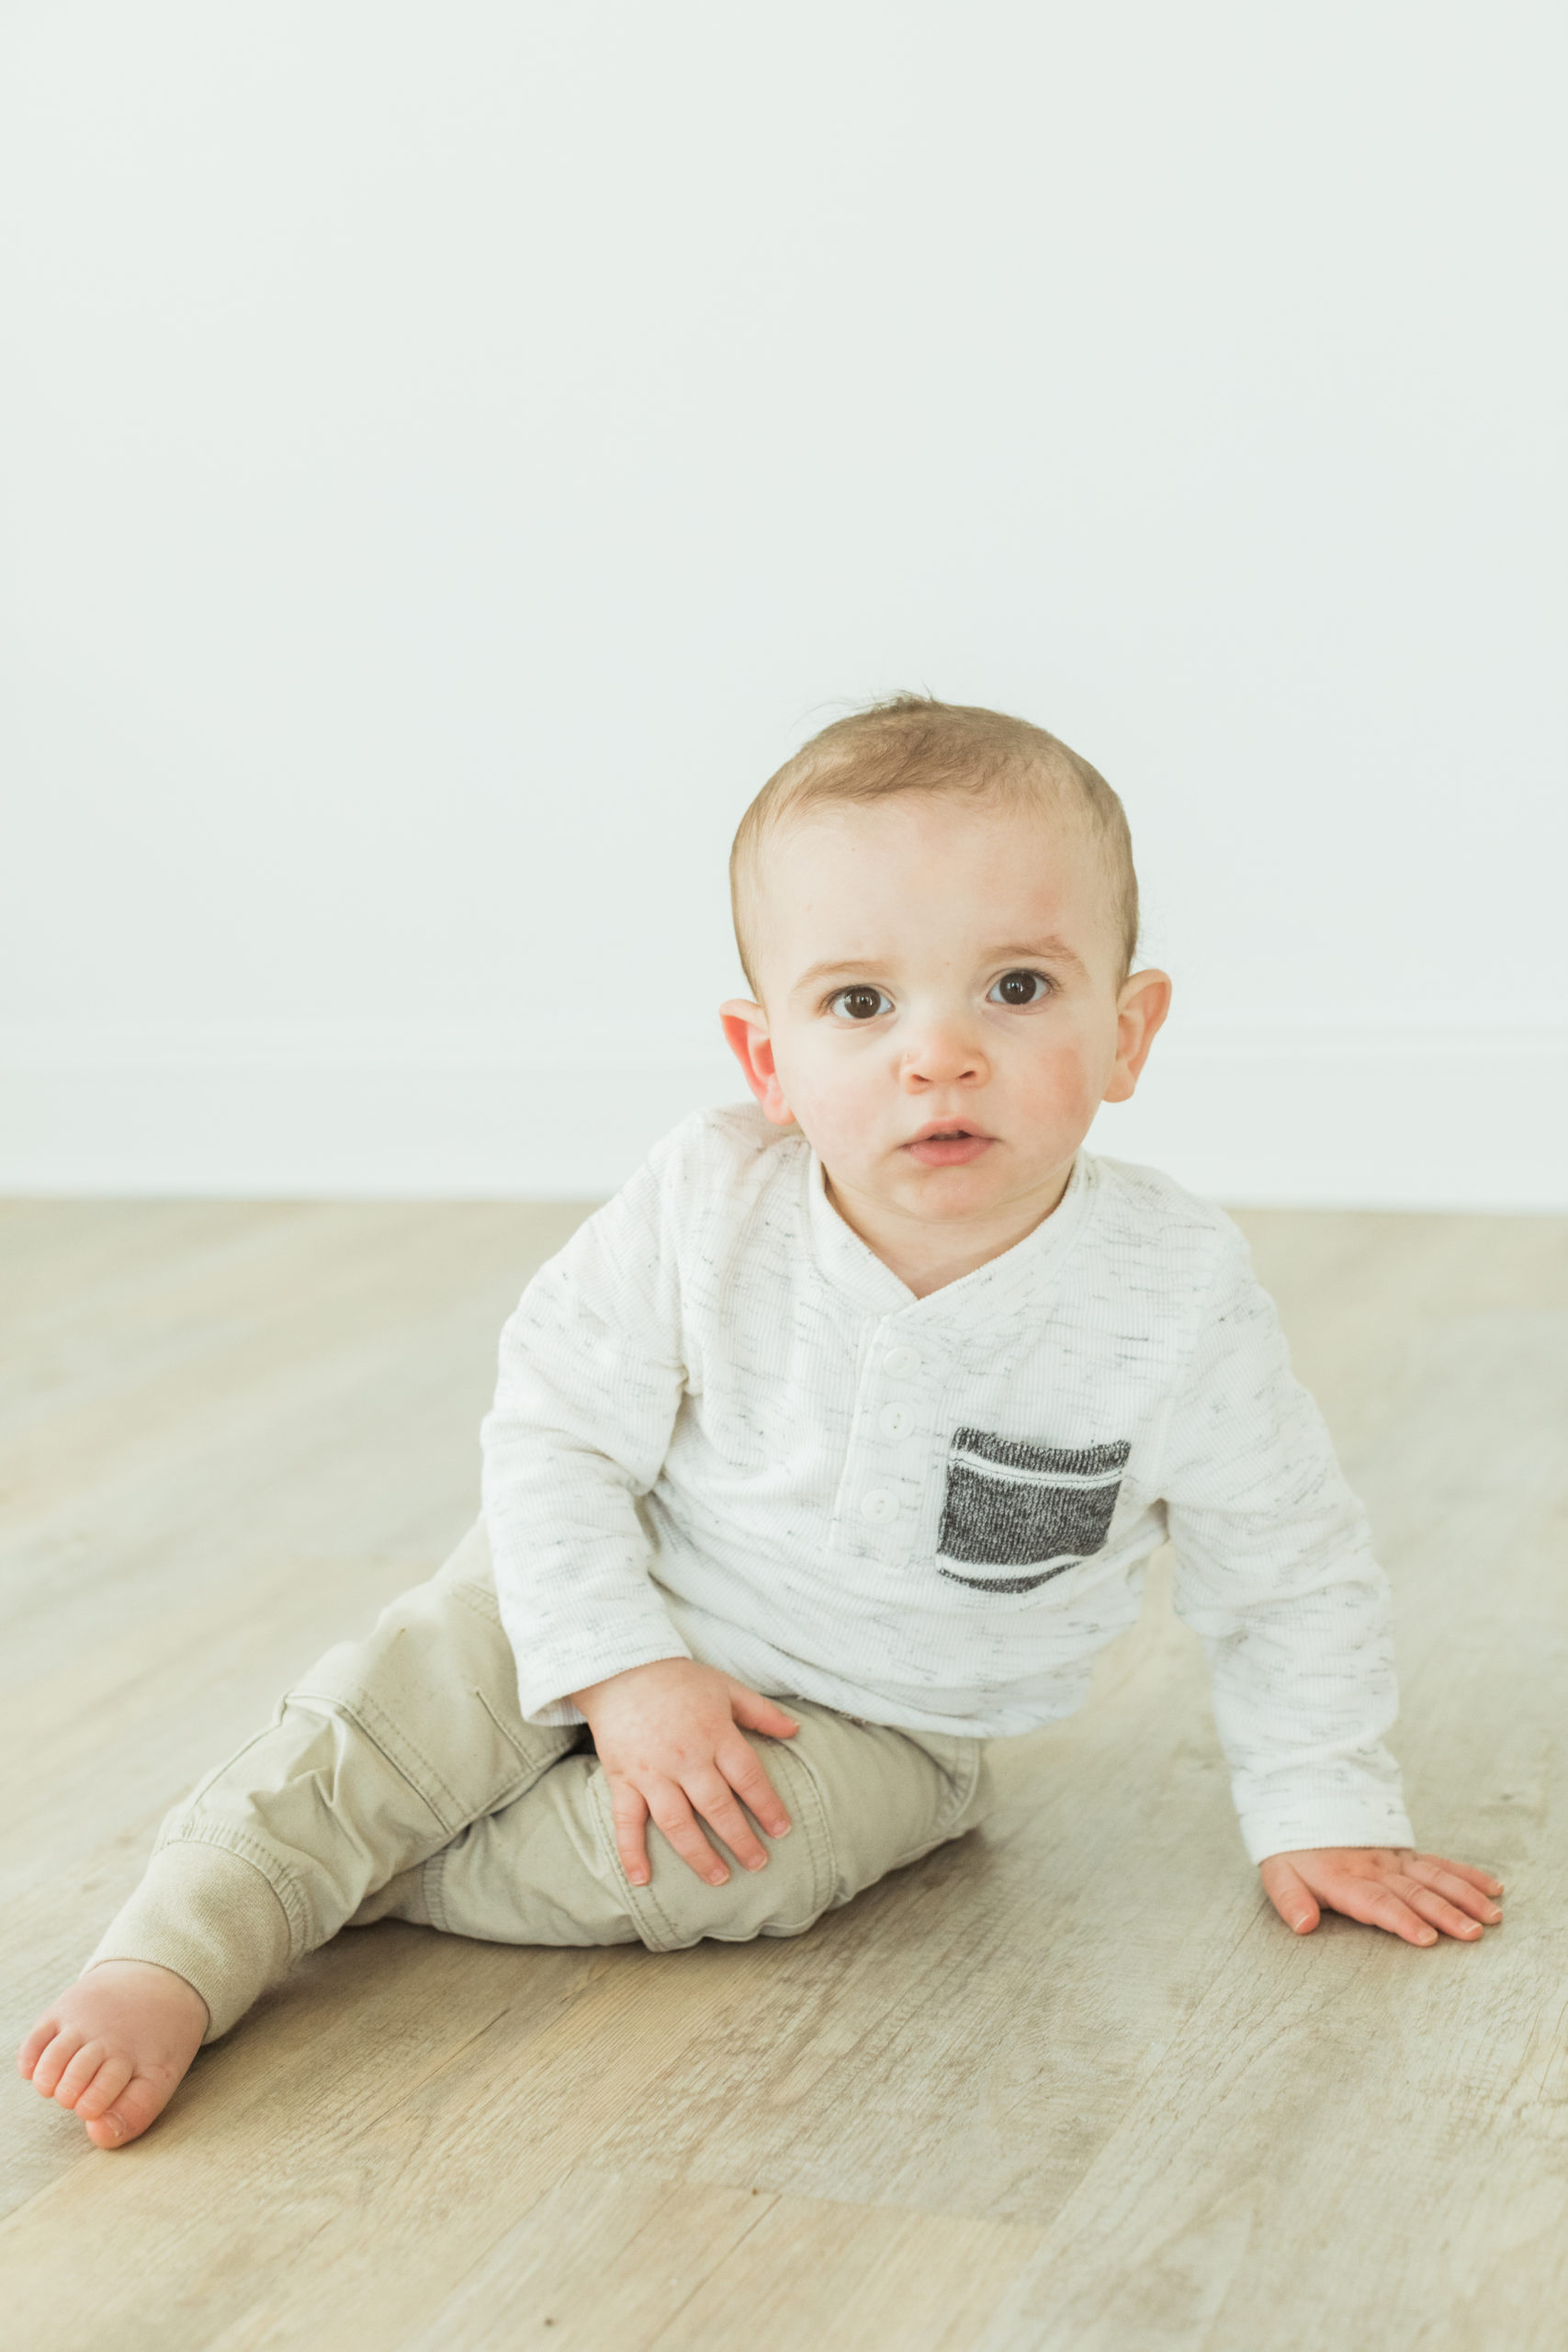 One year old little boy wearing long sleeve shirt and khaki pants, barefoot sitting on the light wooden floor.